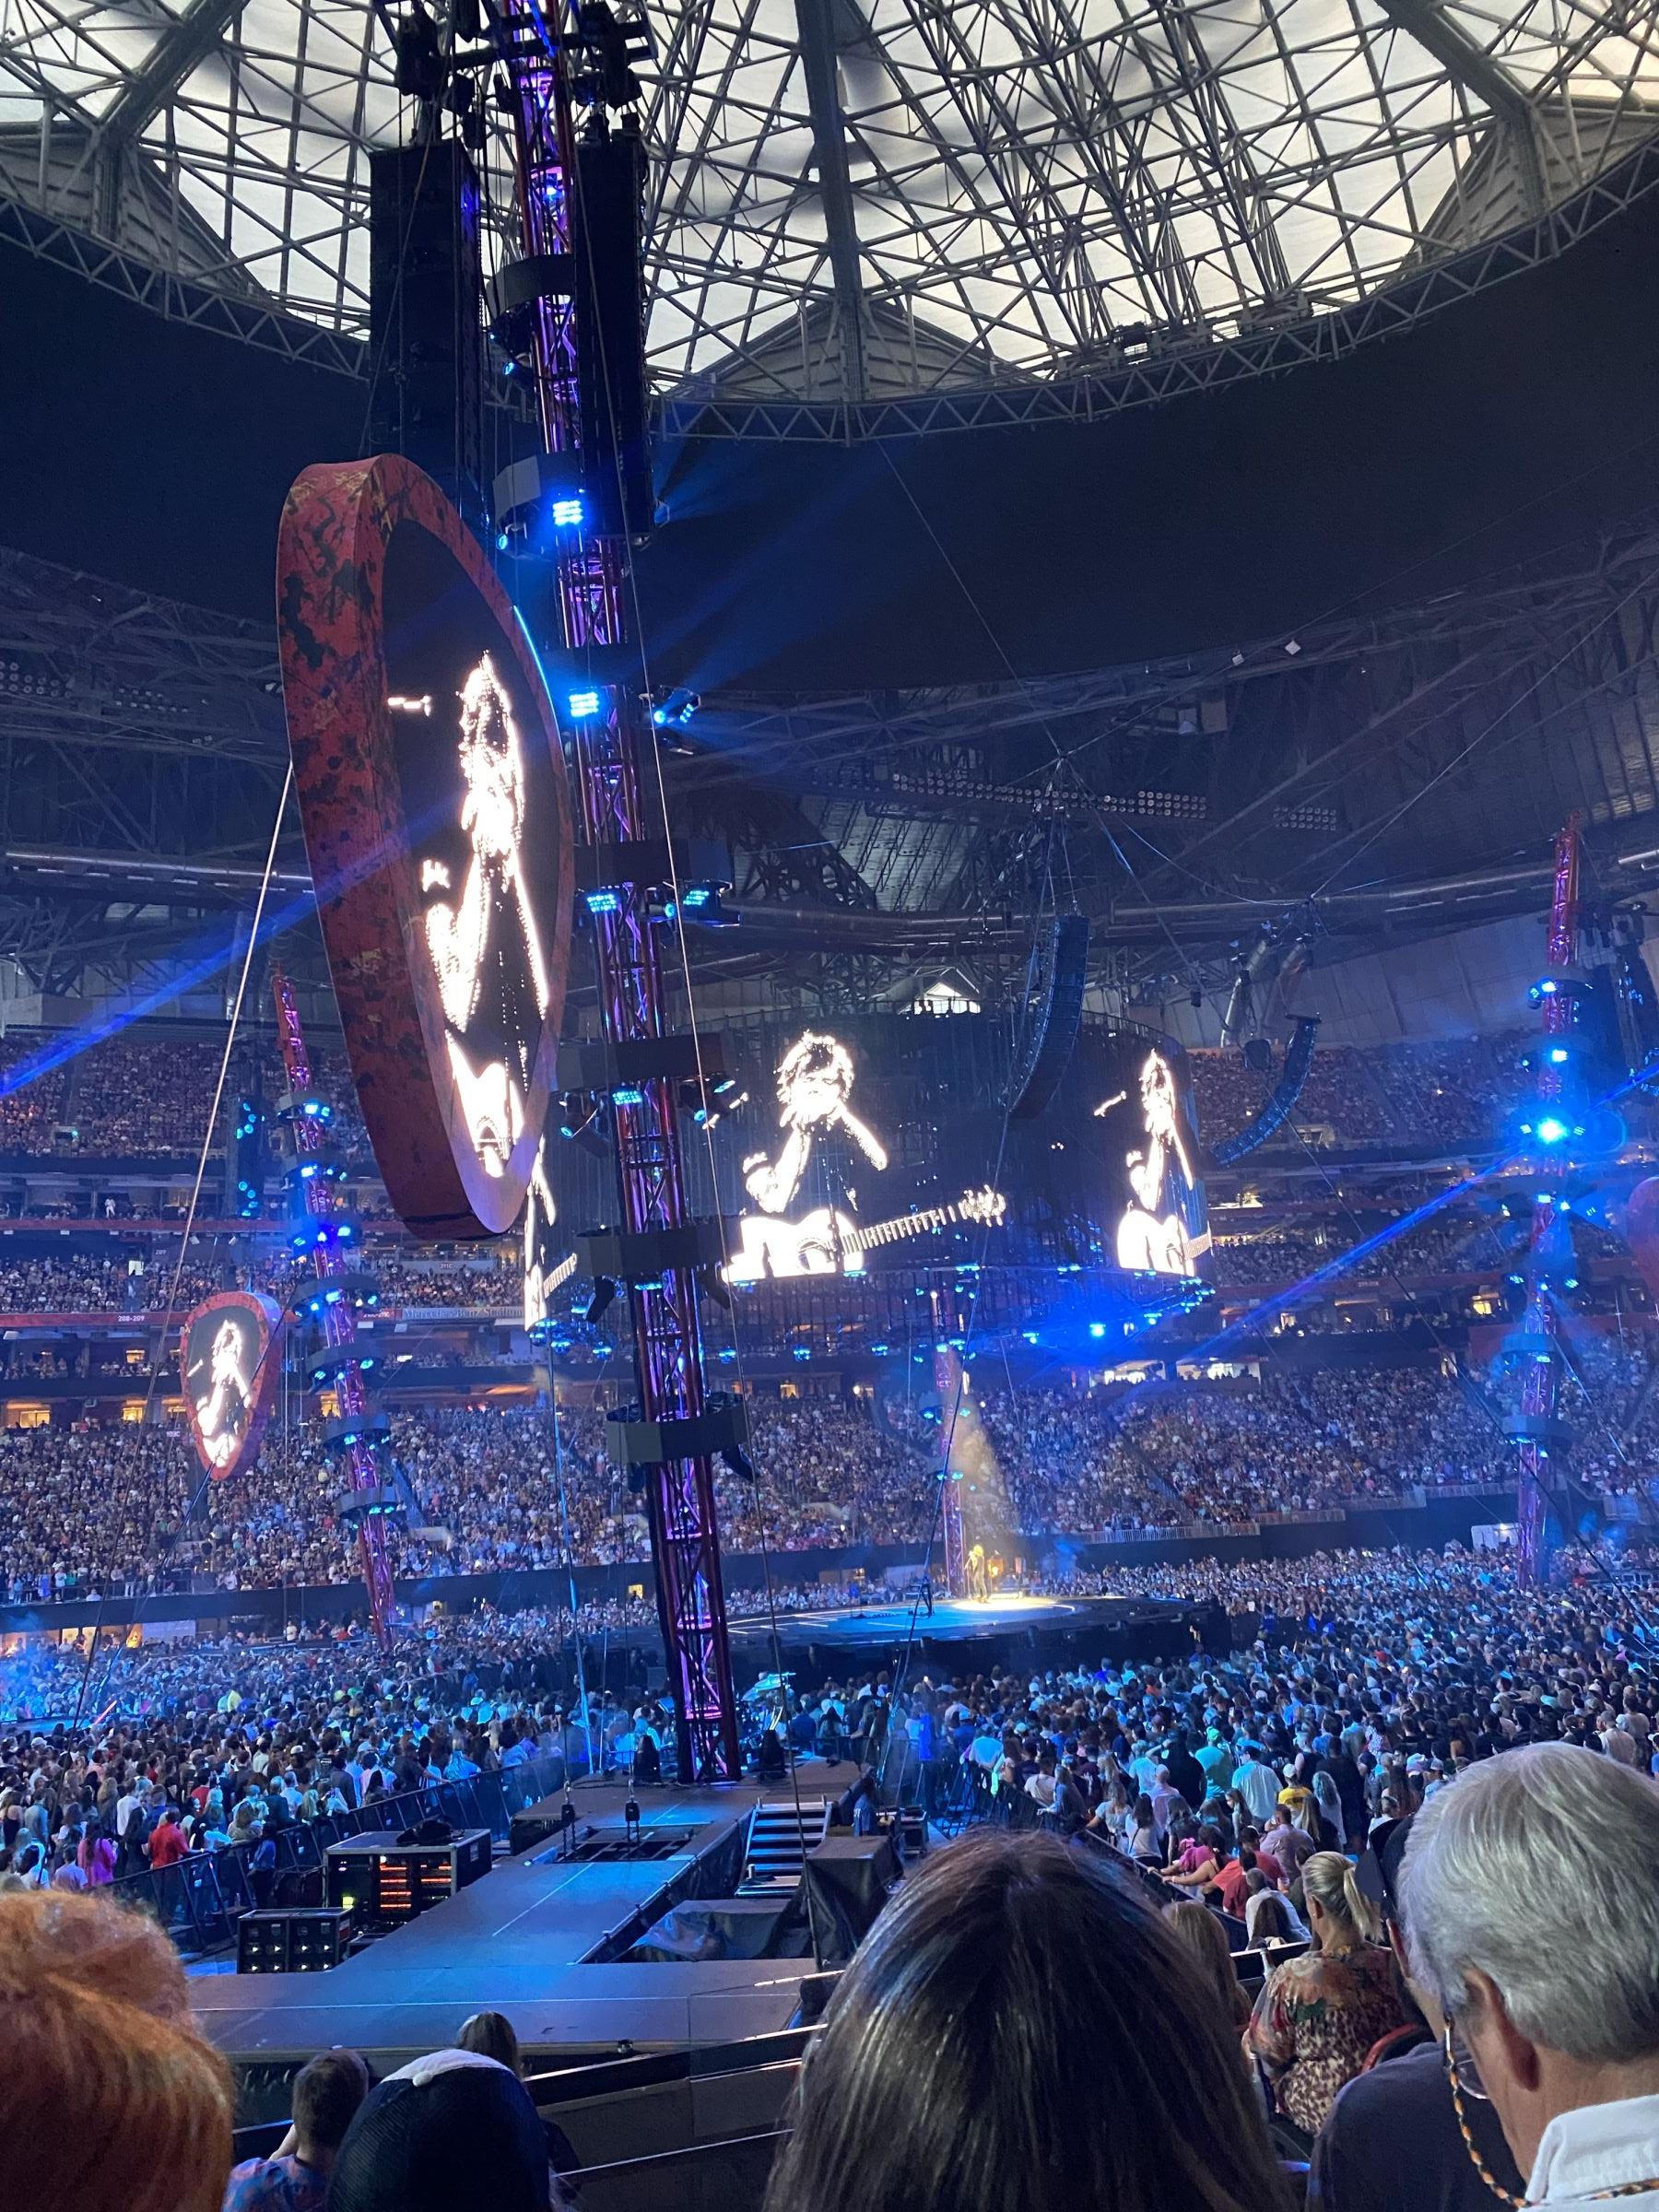 club 130, row 7 seat view  for concert - mercedes-benz stadium